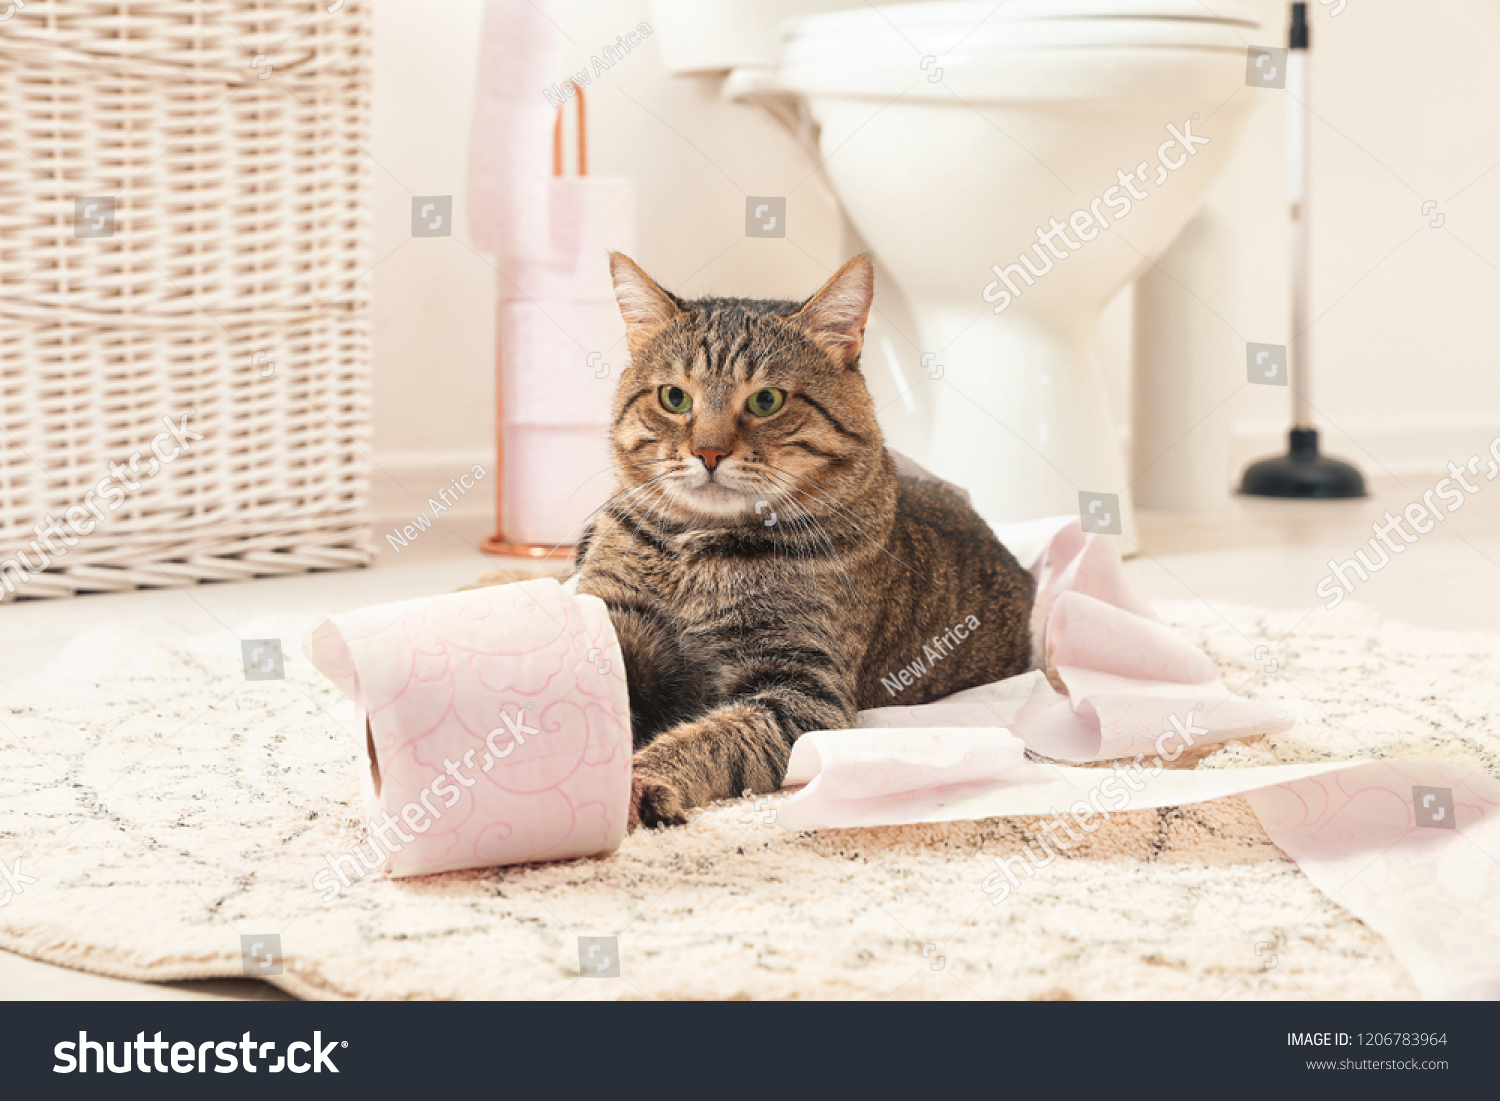 Cute Cat Playing Roll Toilet Paper Stock Photo Edit Now 1206783964